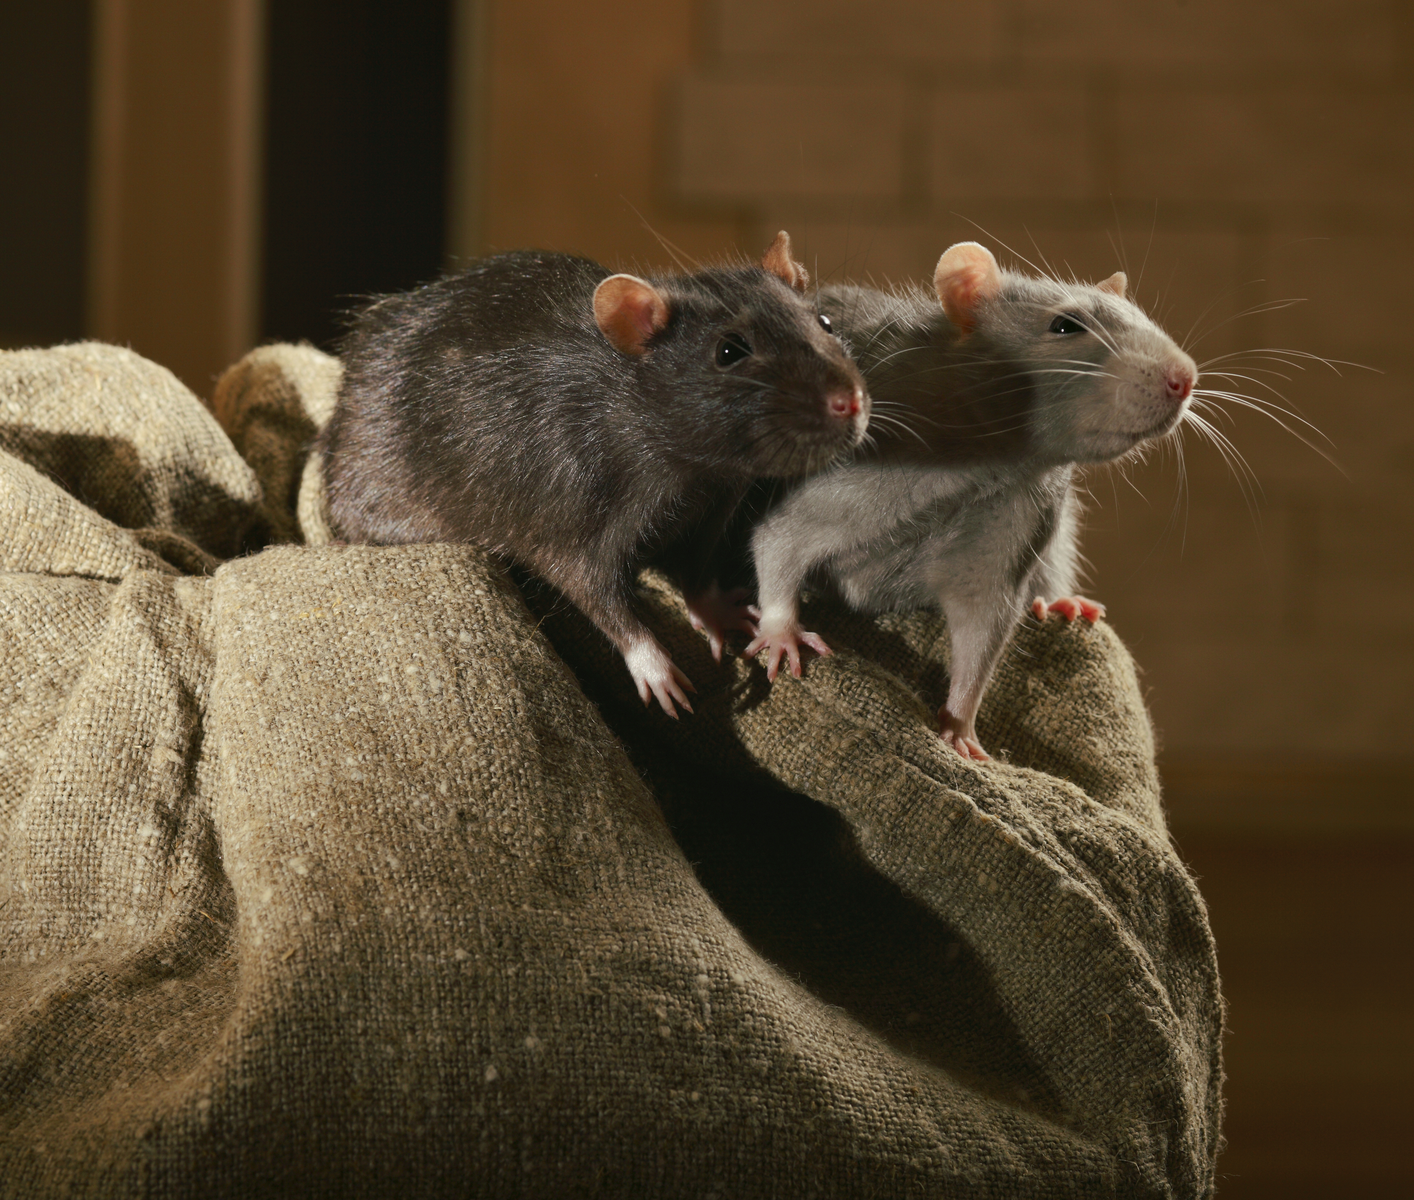 3 Steps to Banish Rats and Mice from Your Shed, Barn, and Farm